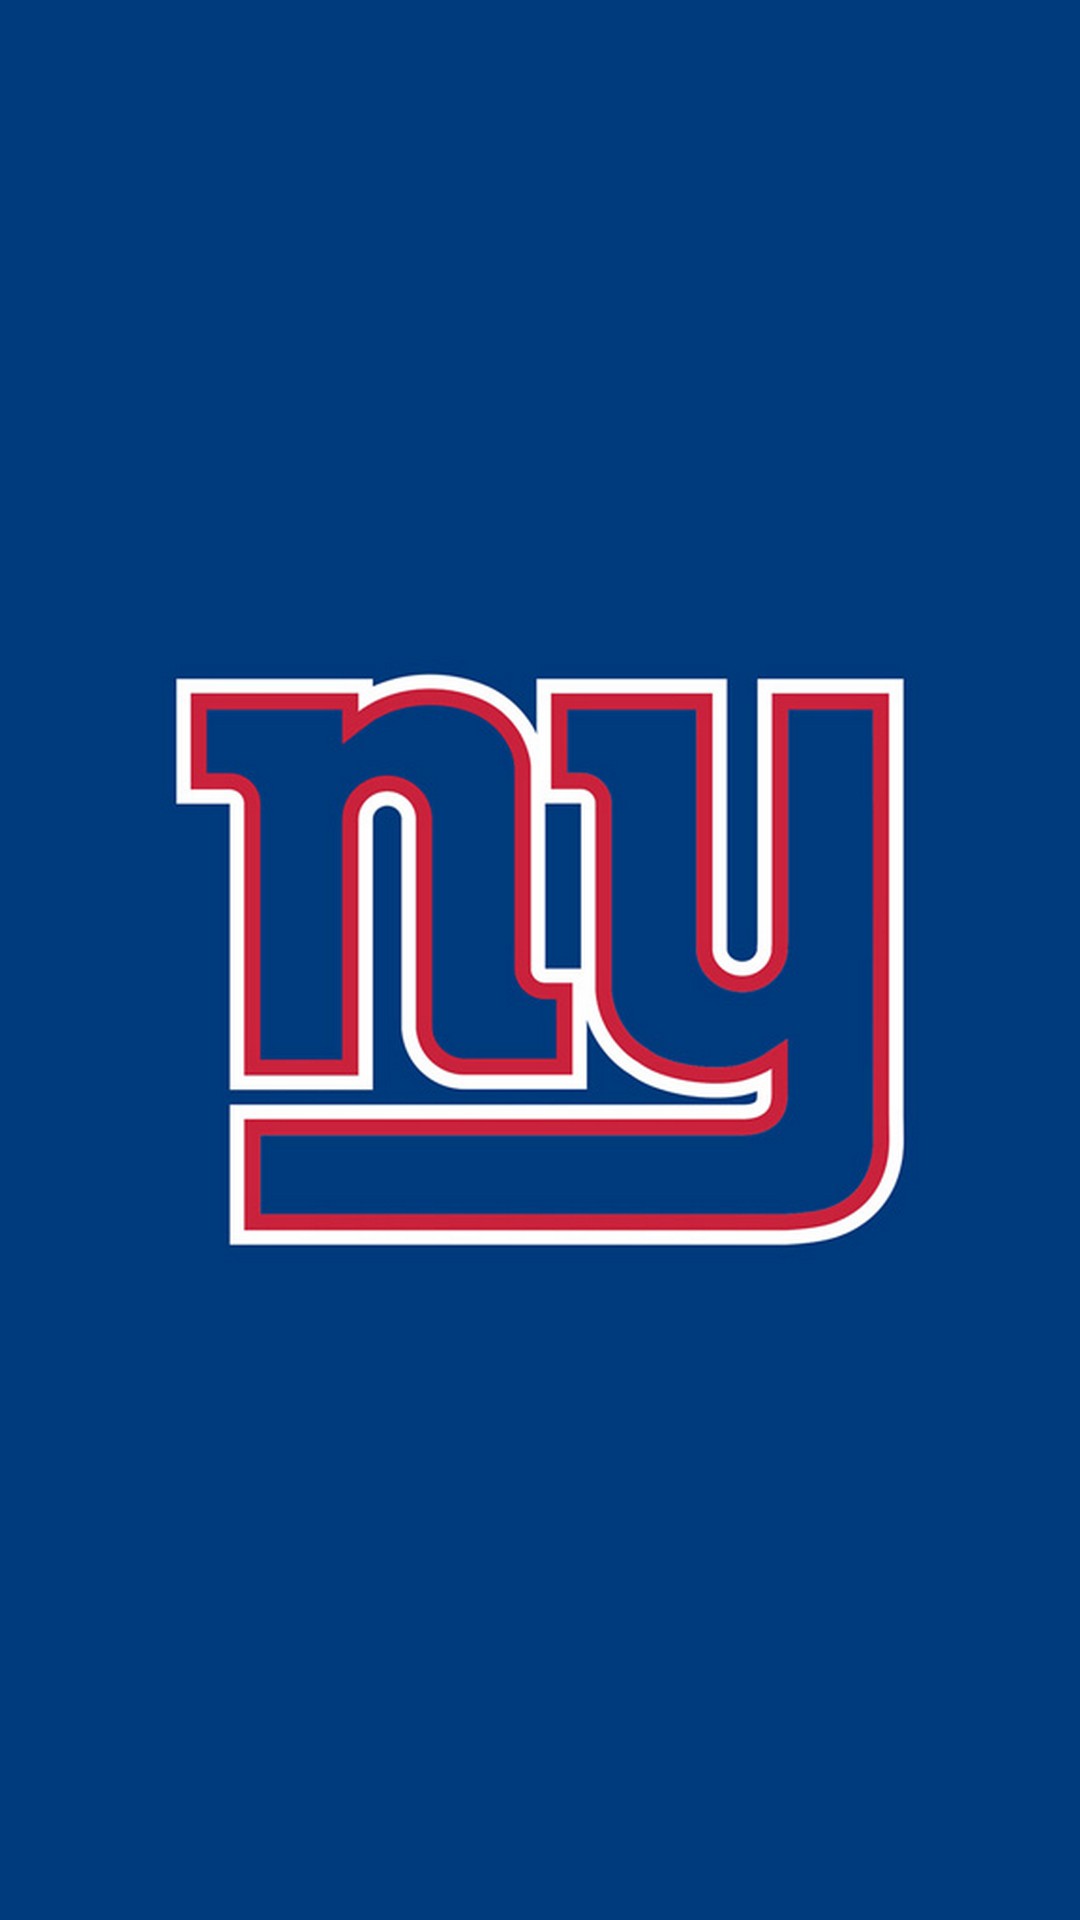 New York Giants iPhone Screen Wallpaper With high-resolution 1080X1920 pixel. Donwload and set as wallpaper for your iPhone X, iPhone XS home screen backgrounds, XS Max, XR, iPhone8 lock screen wallpaper, iPhone 7, 6, SE, and other mobile devices